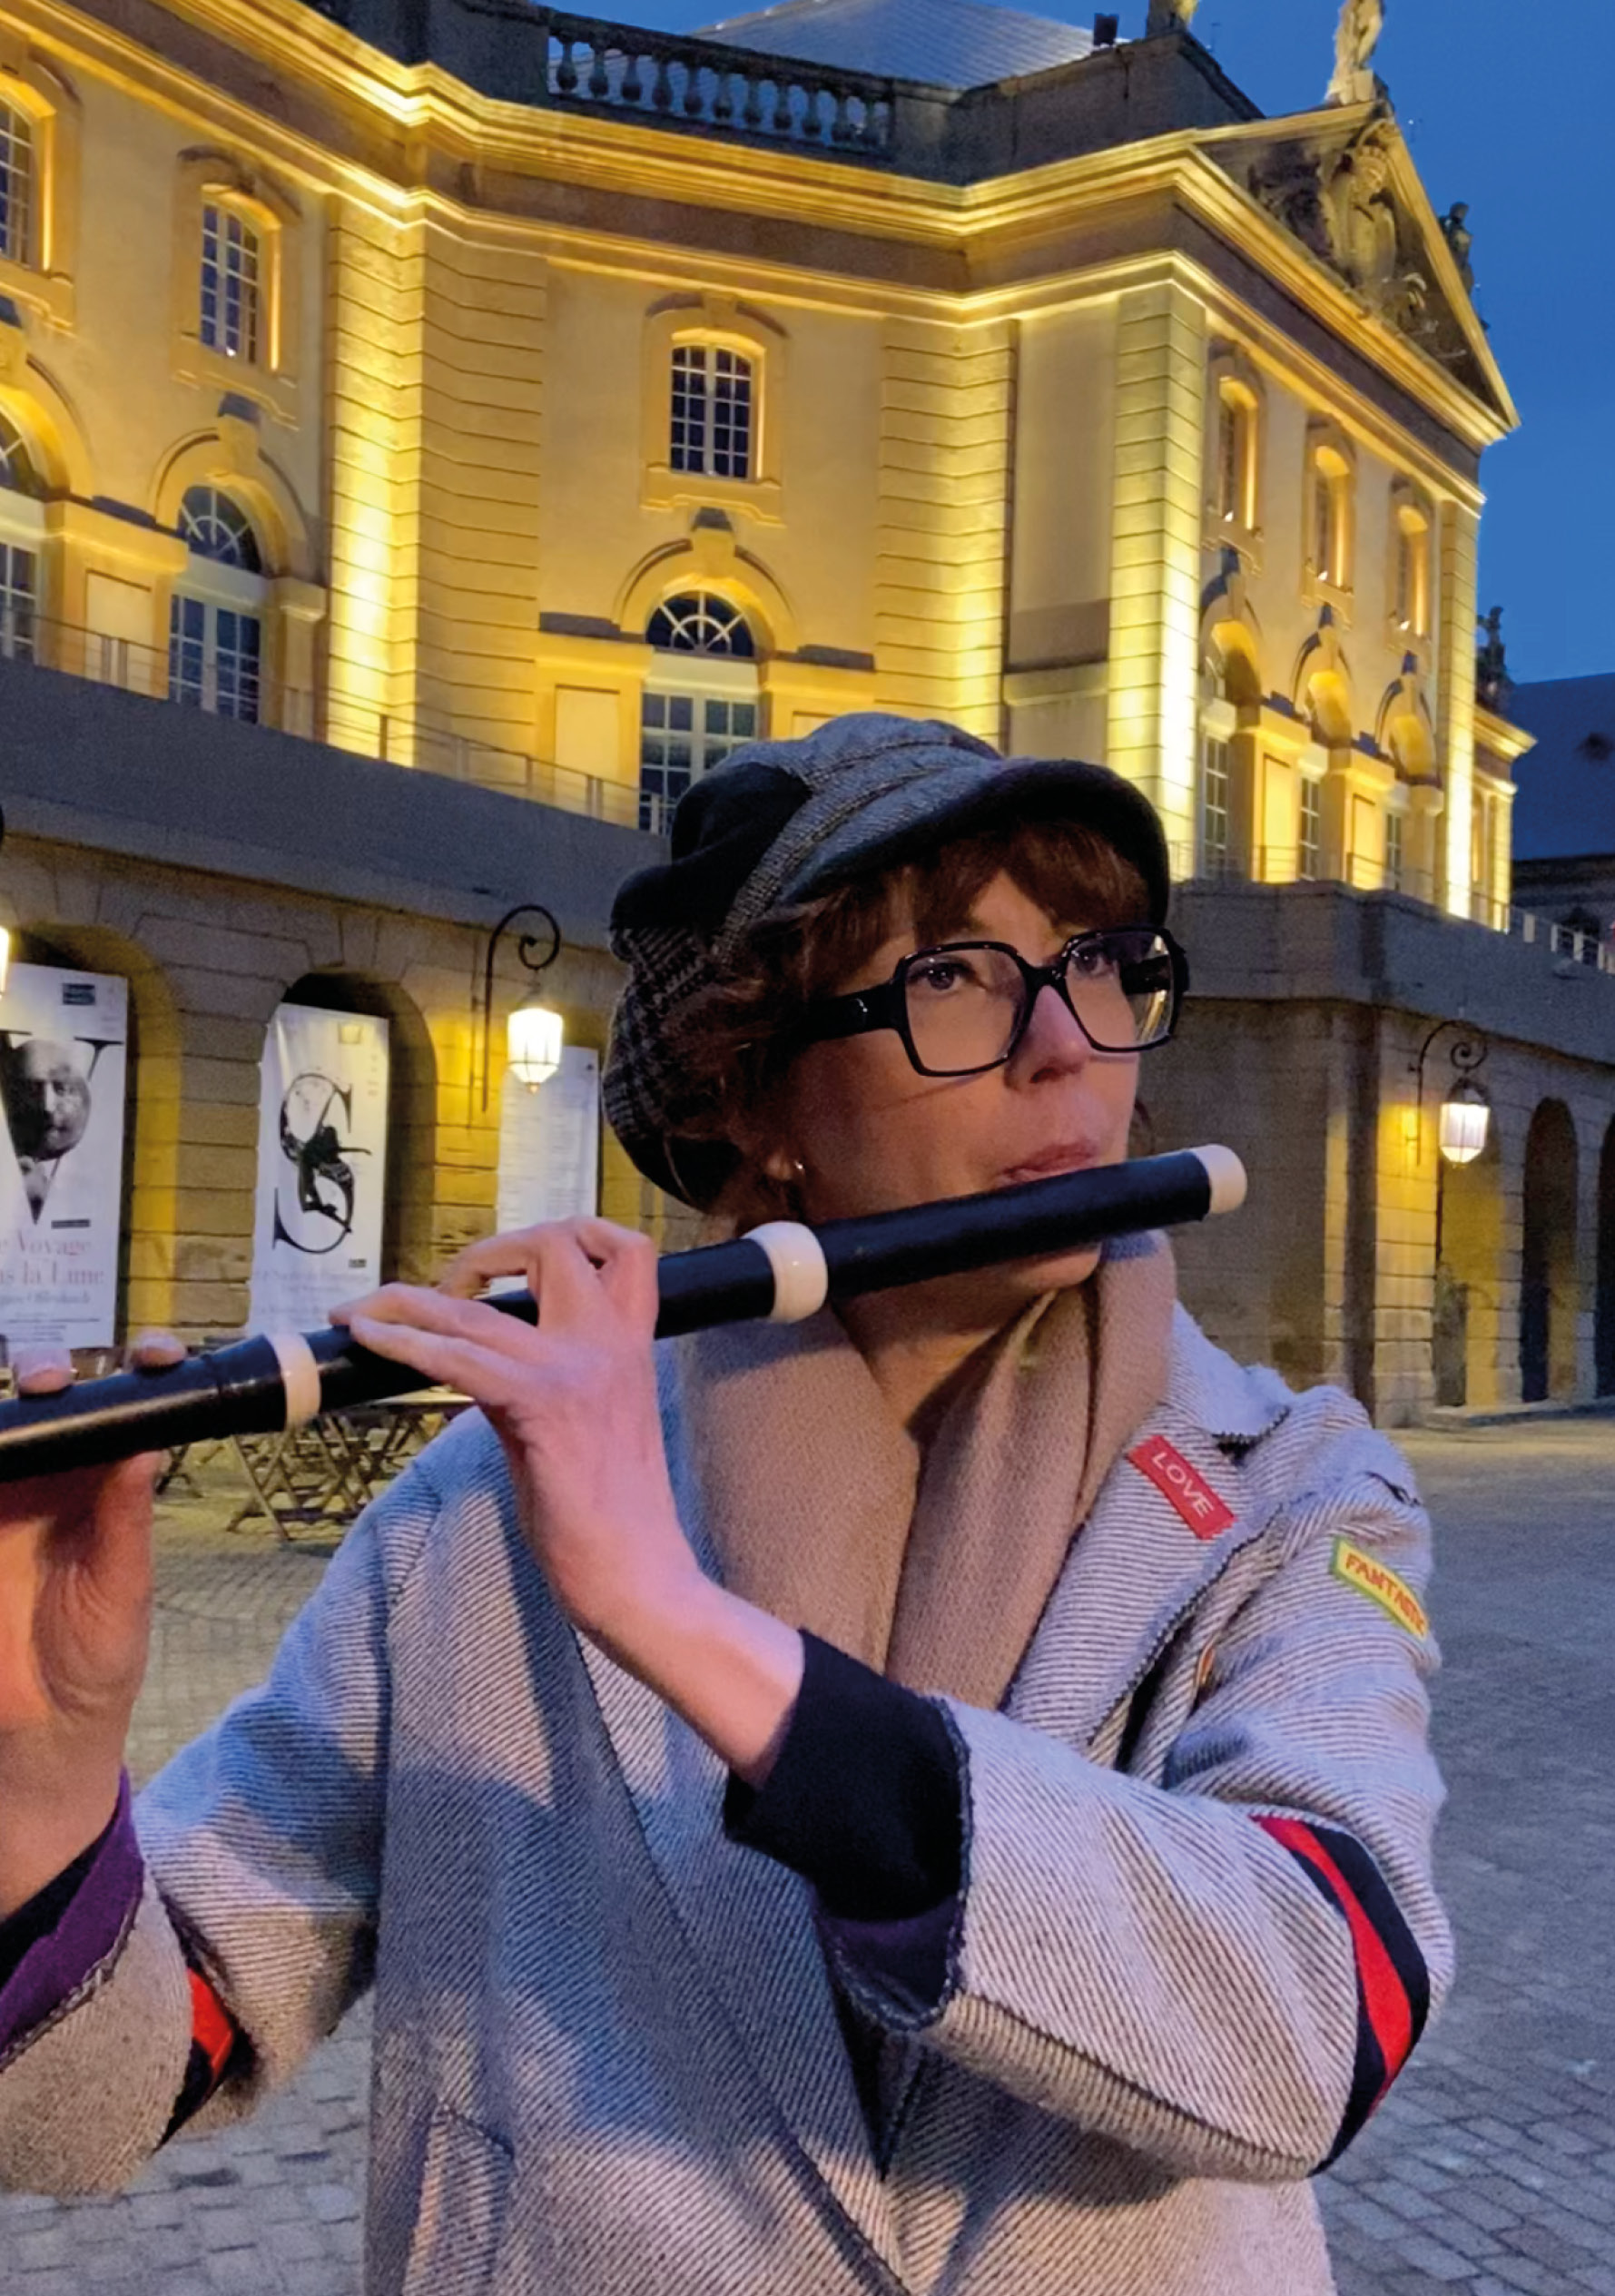 For the first spot-light “Instant Talent”, the Inspire Metz agency offers you an immersion into the 18th and 19th centuries with self-employed businesswoman Adeline Karcher, historian, musician, singer and flutist, who, through her visits, helps to promot